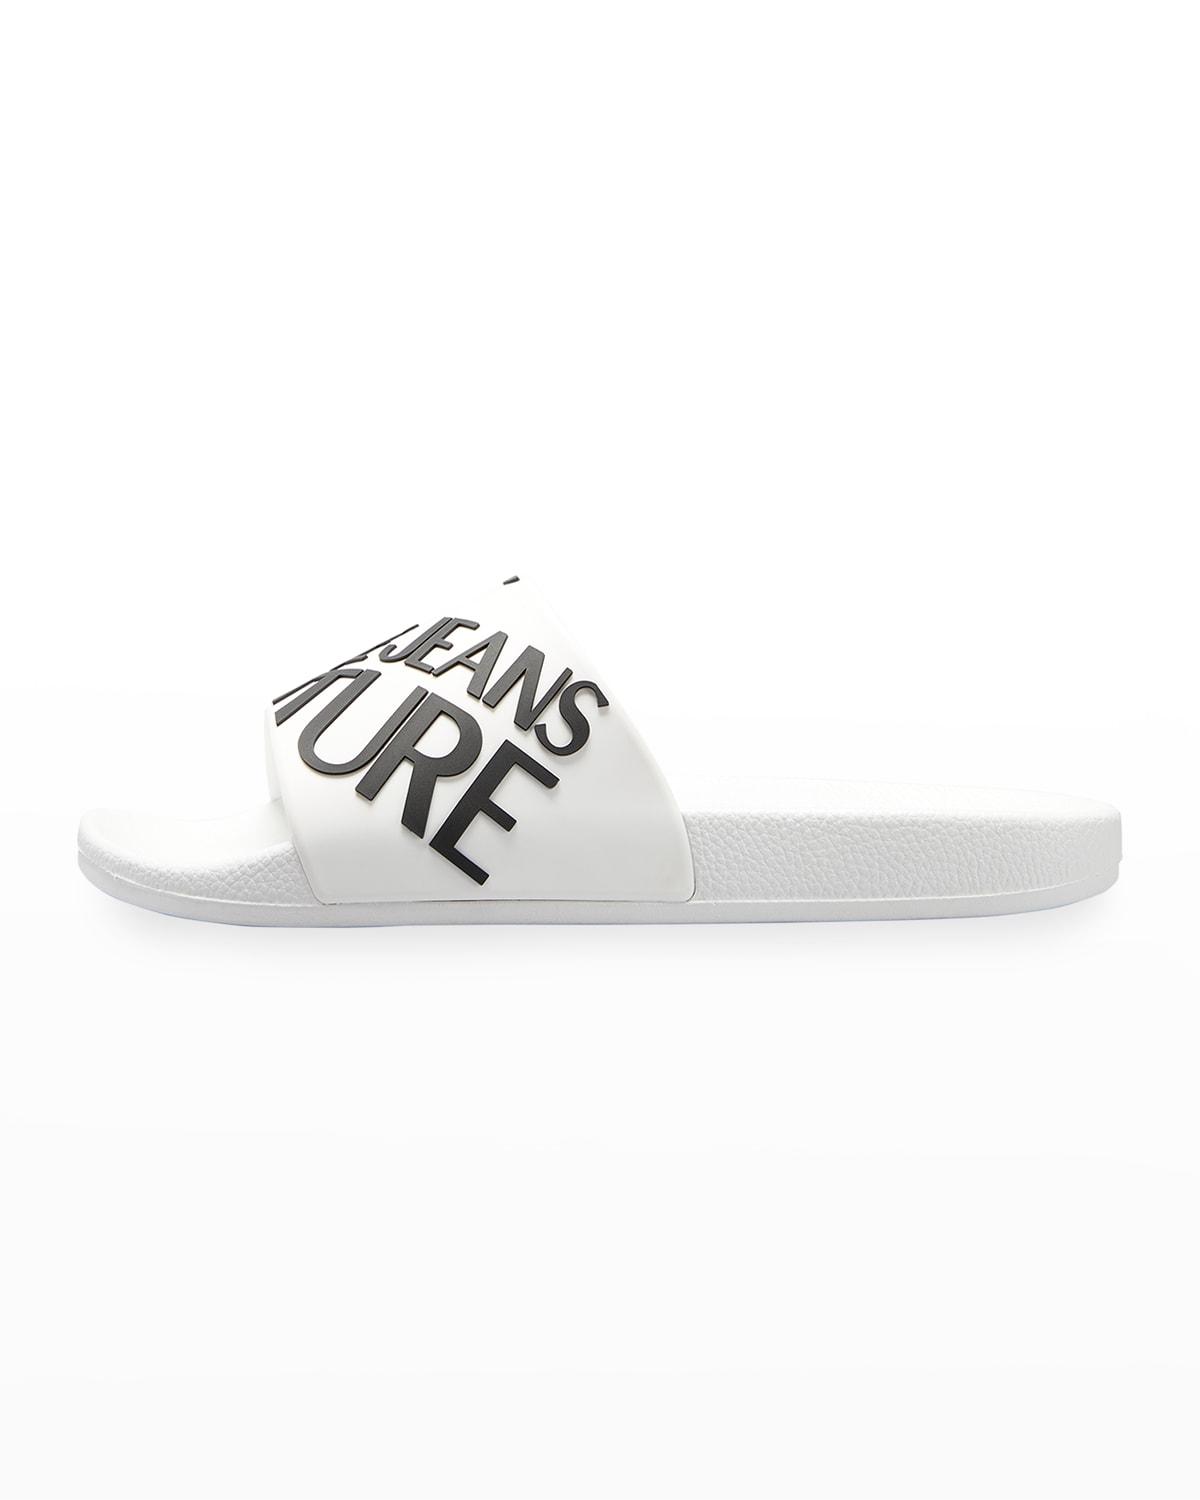 Versace Jeans Couture Logo Pool Slide Sandals in White for Men | Lyst